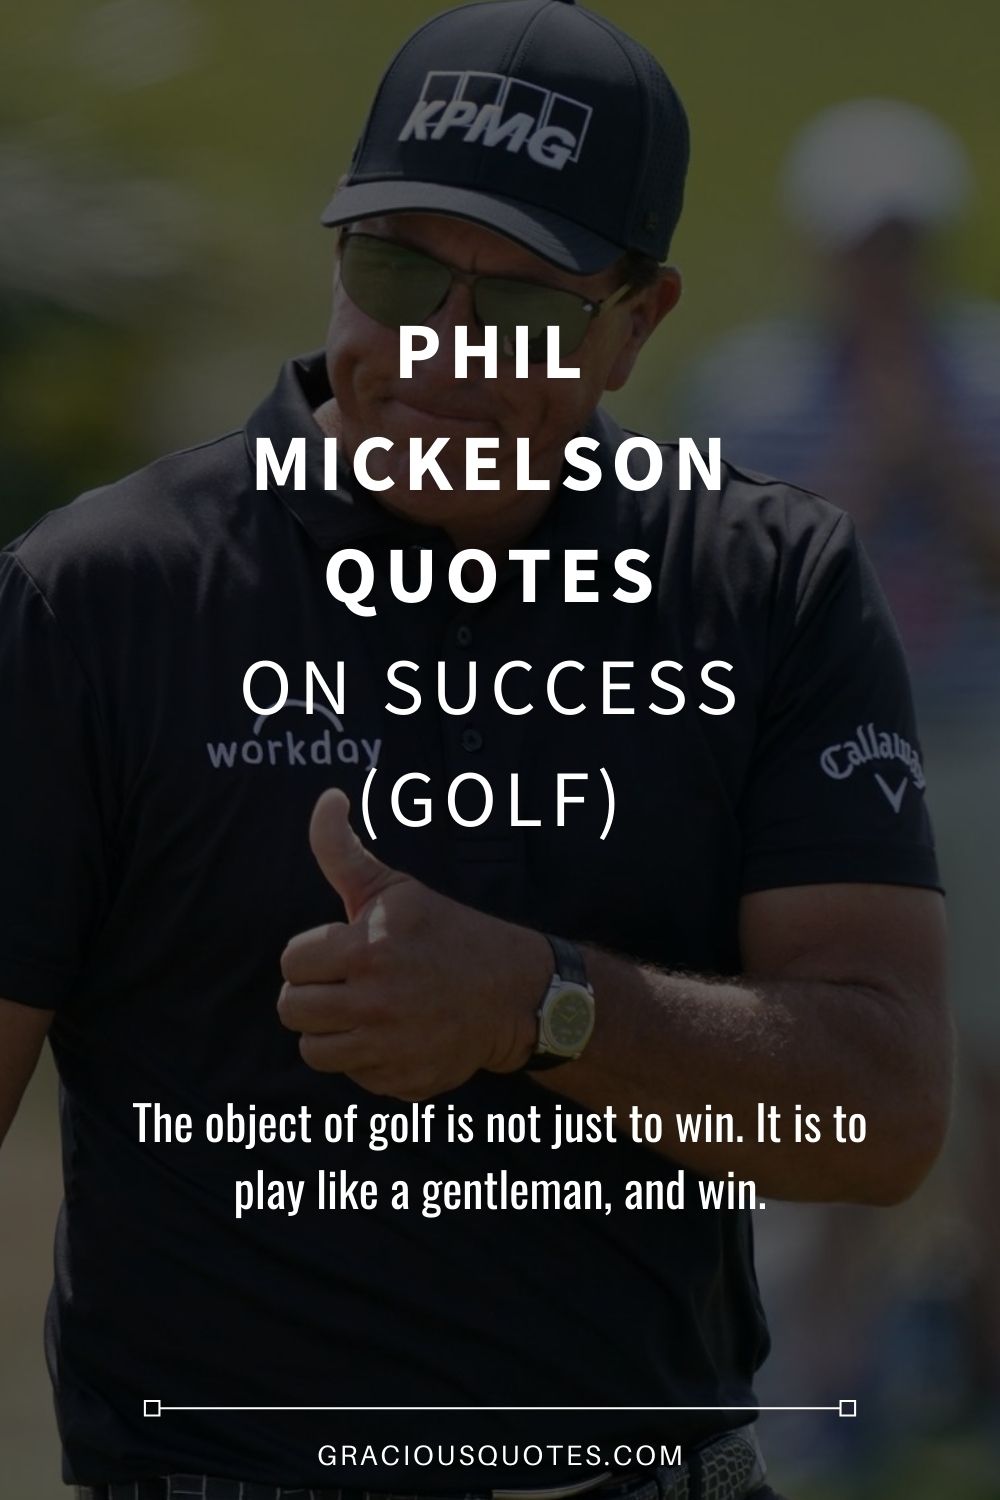 33 Phil Mickelson Quotes on Success (GOLF)